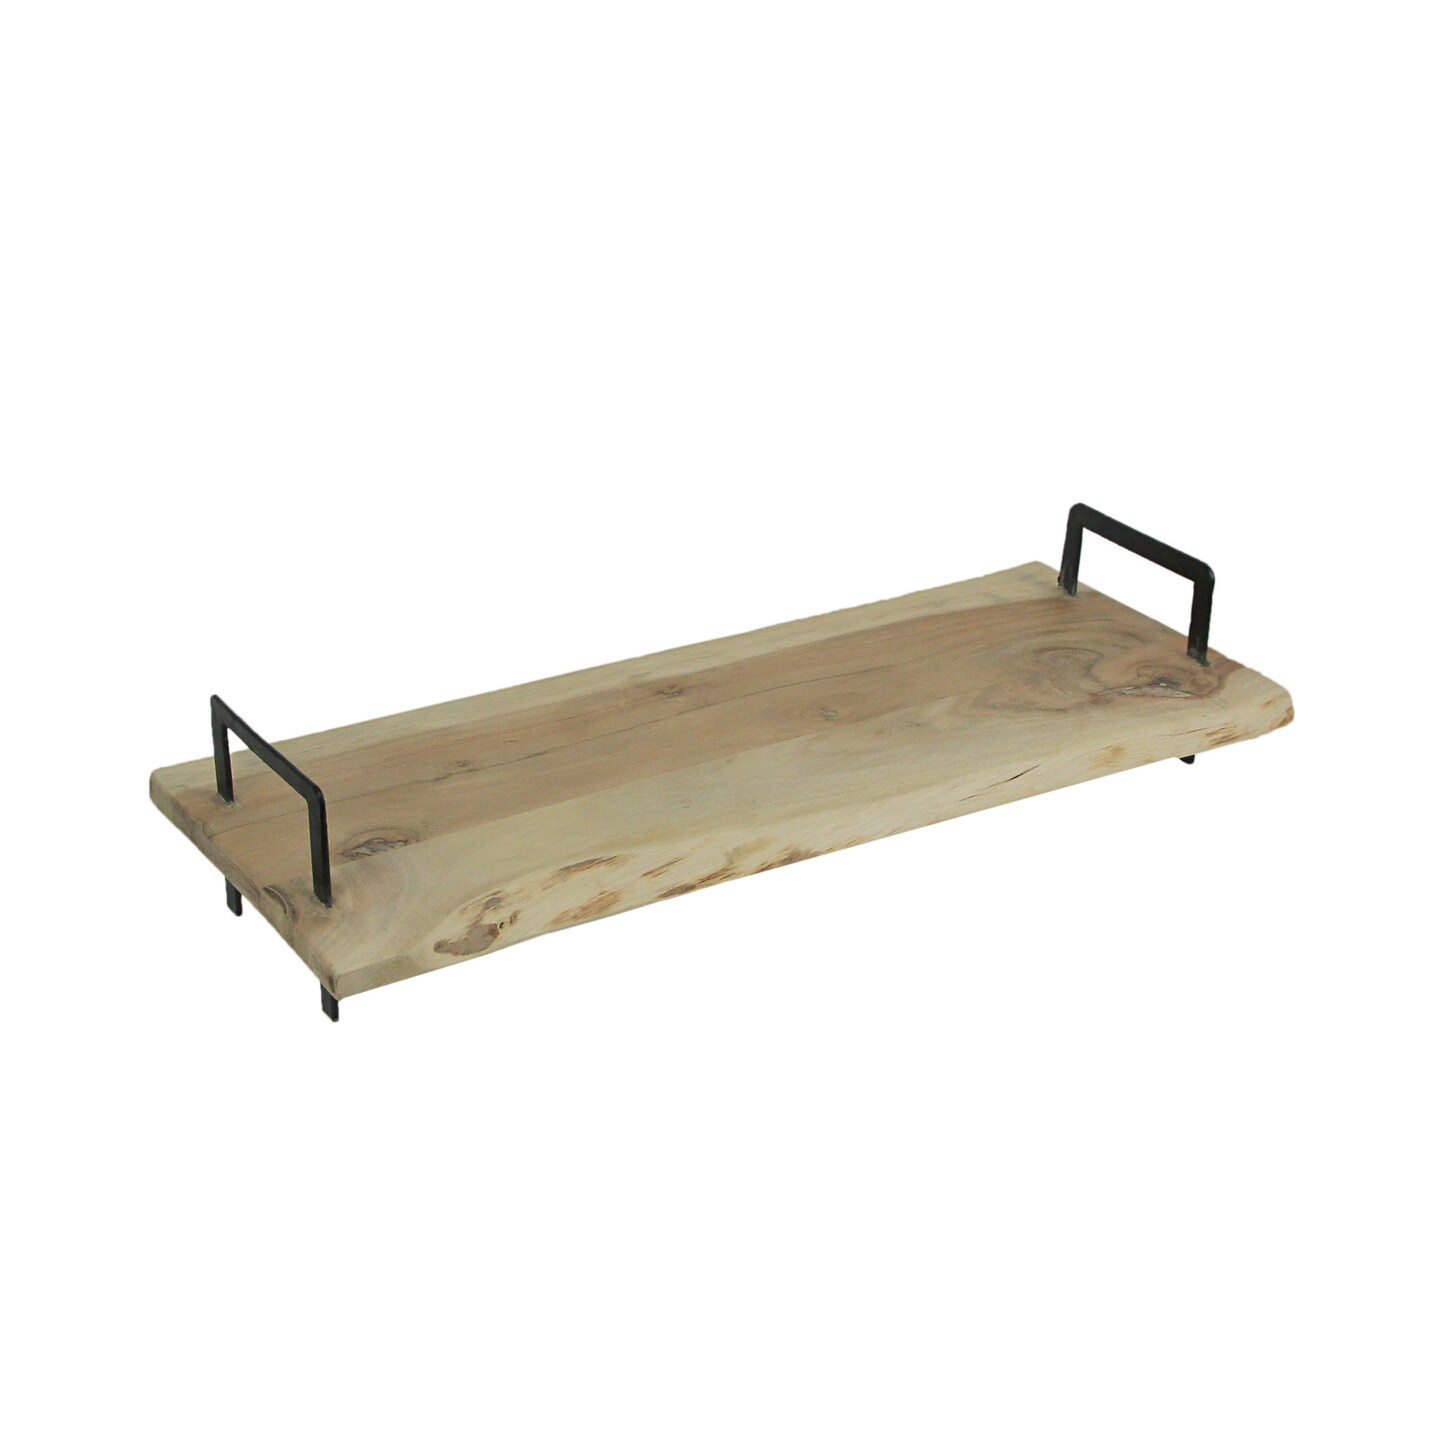 Rectangle Live Wood Edge Serving Tray Stand With Metal Handles Charcuterie Board